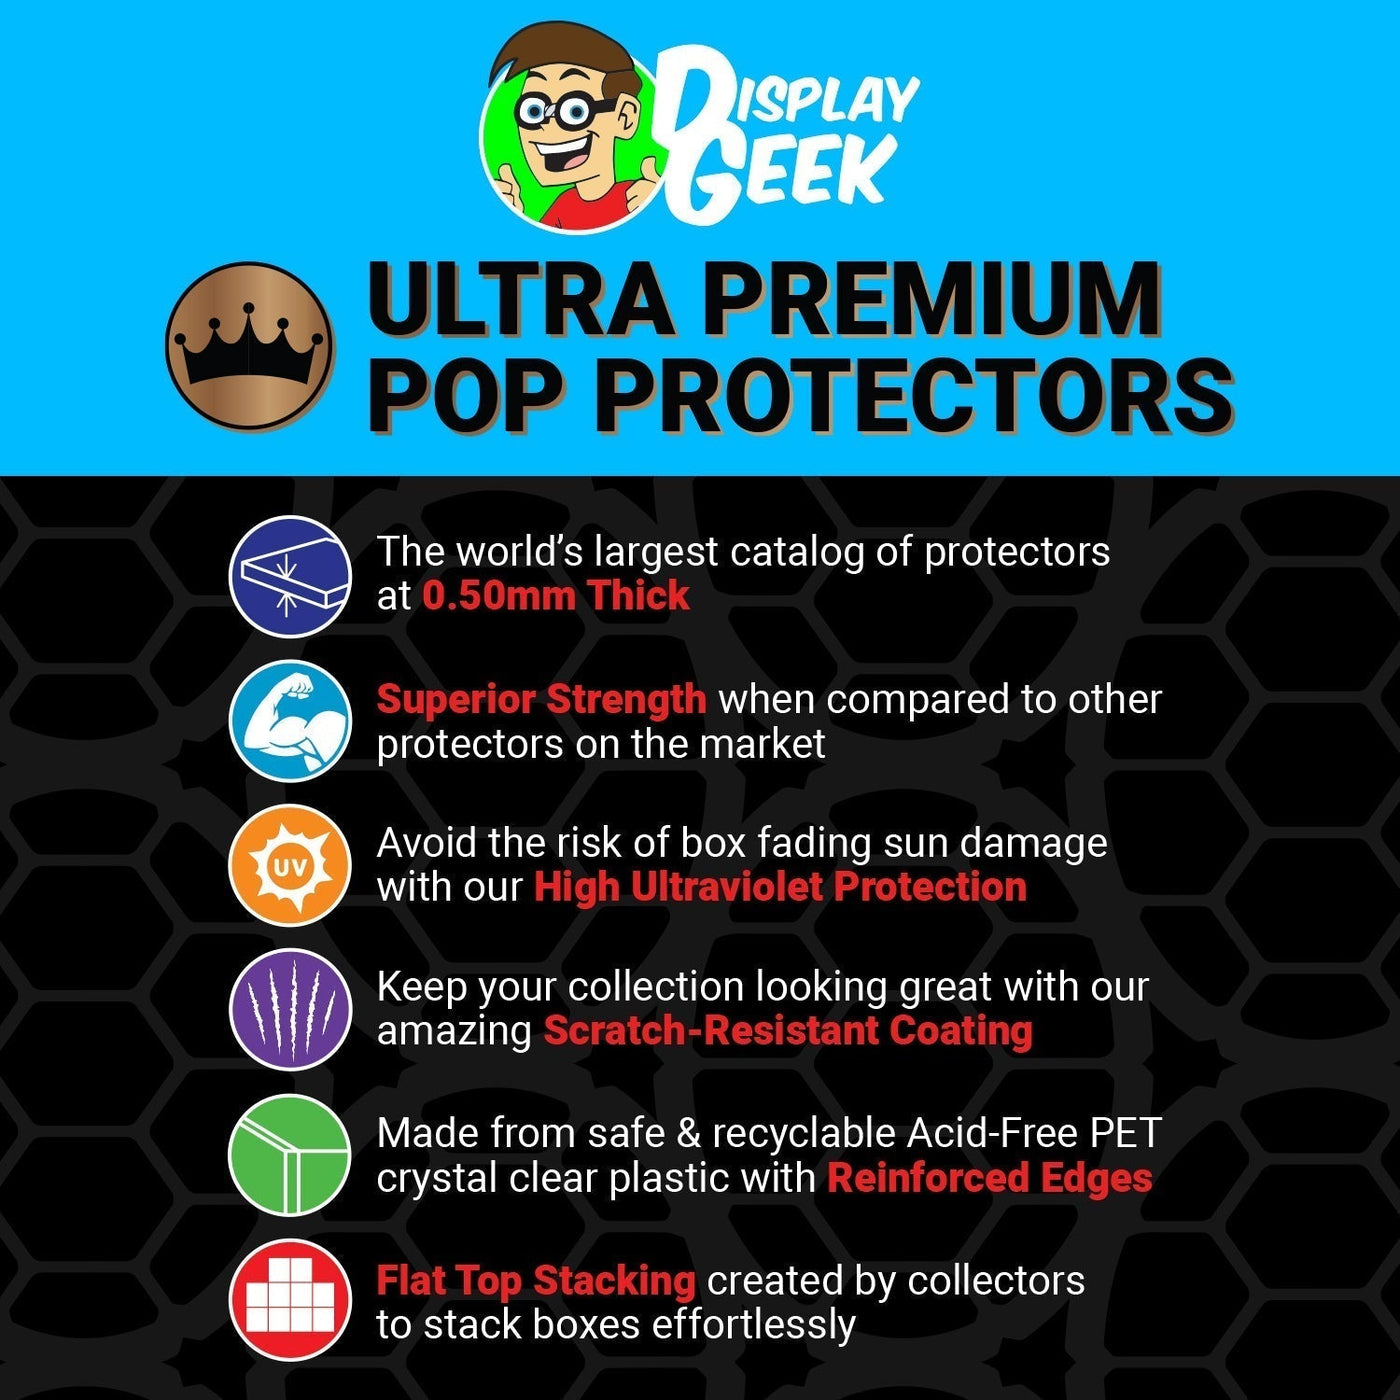 Pop Protector for Elvira FunkO's Cereal Box on The Protector Guide App by Display Geek